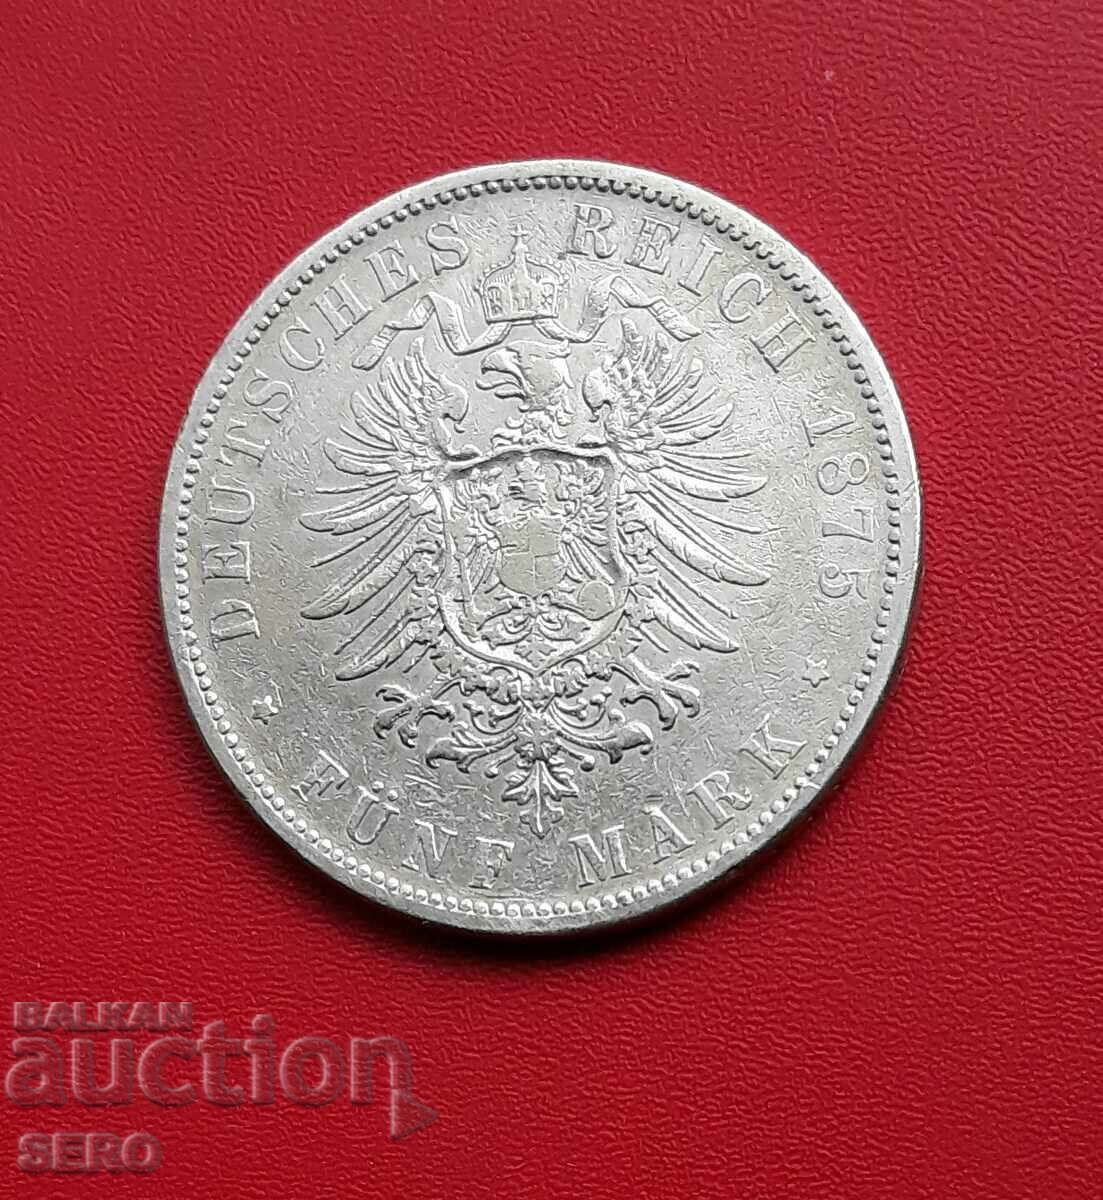 Germany-Prussia-5 Marks 1875 In-Hanover